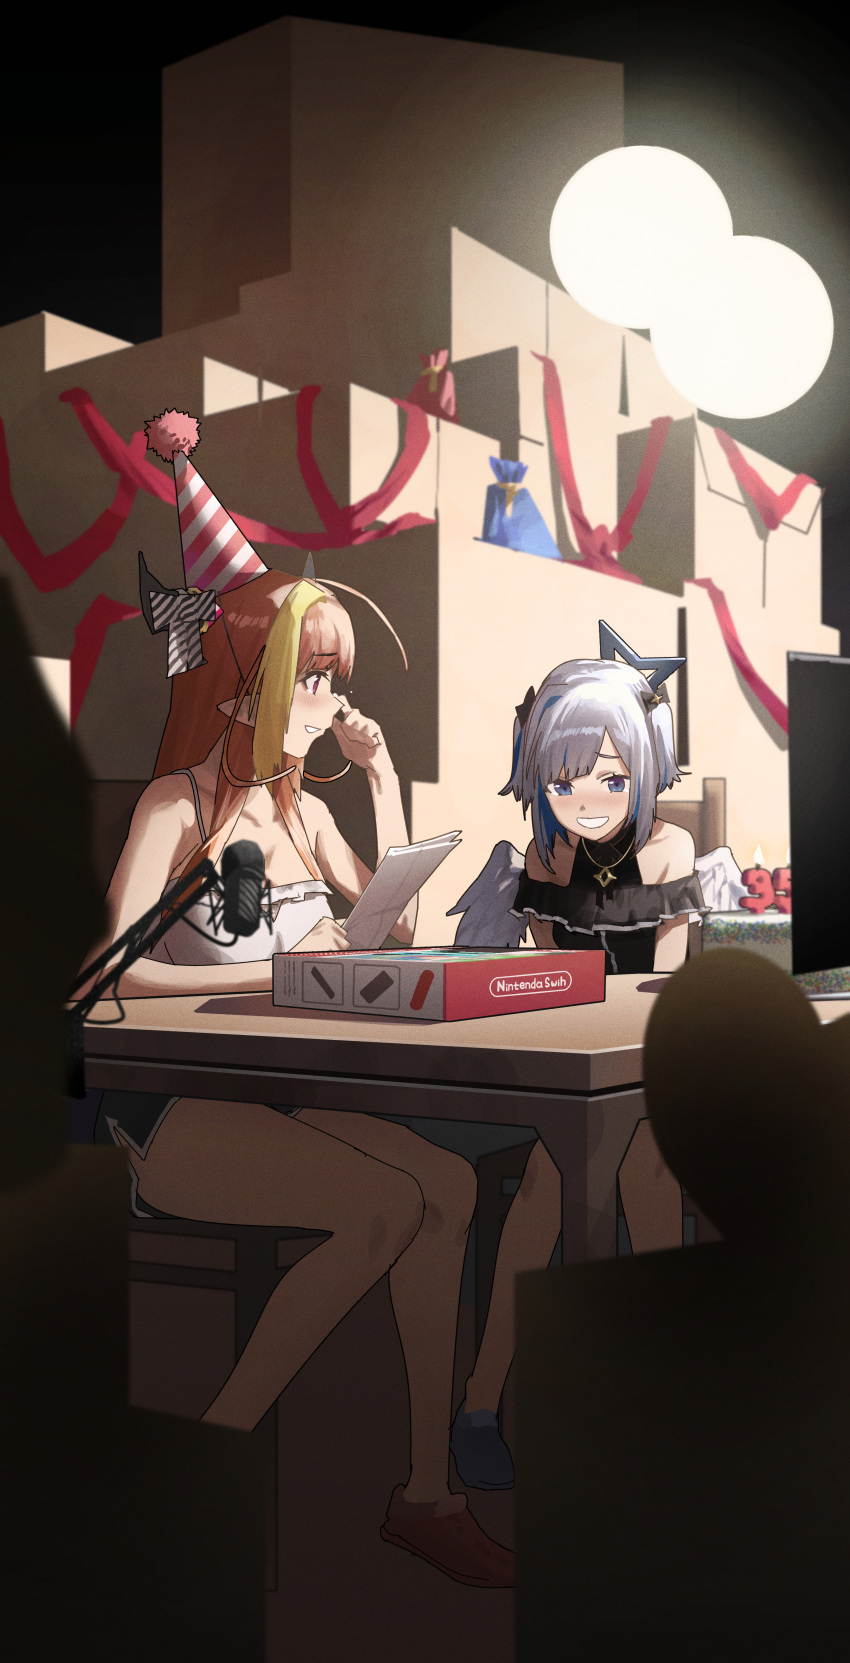 2girls absurdres amane_kanata birthday_party blue_eyes bow box cake candle food gift hat highres holding holding_paper hololive horns kiryu_coco microphone microphone_stand multiple_girls nintendo_switch orange_hair paper party_hat red_eyes red_ribbon ribbon shorts sitting smile table tearing_up tears white_hair wings wiping_tears xiaoju_xiaojie